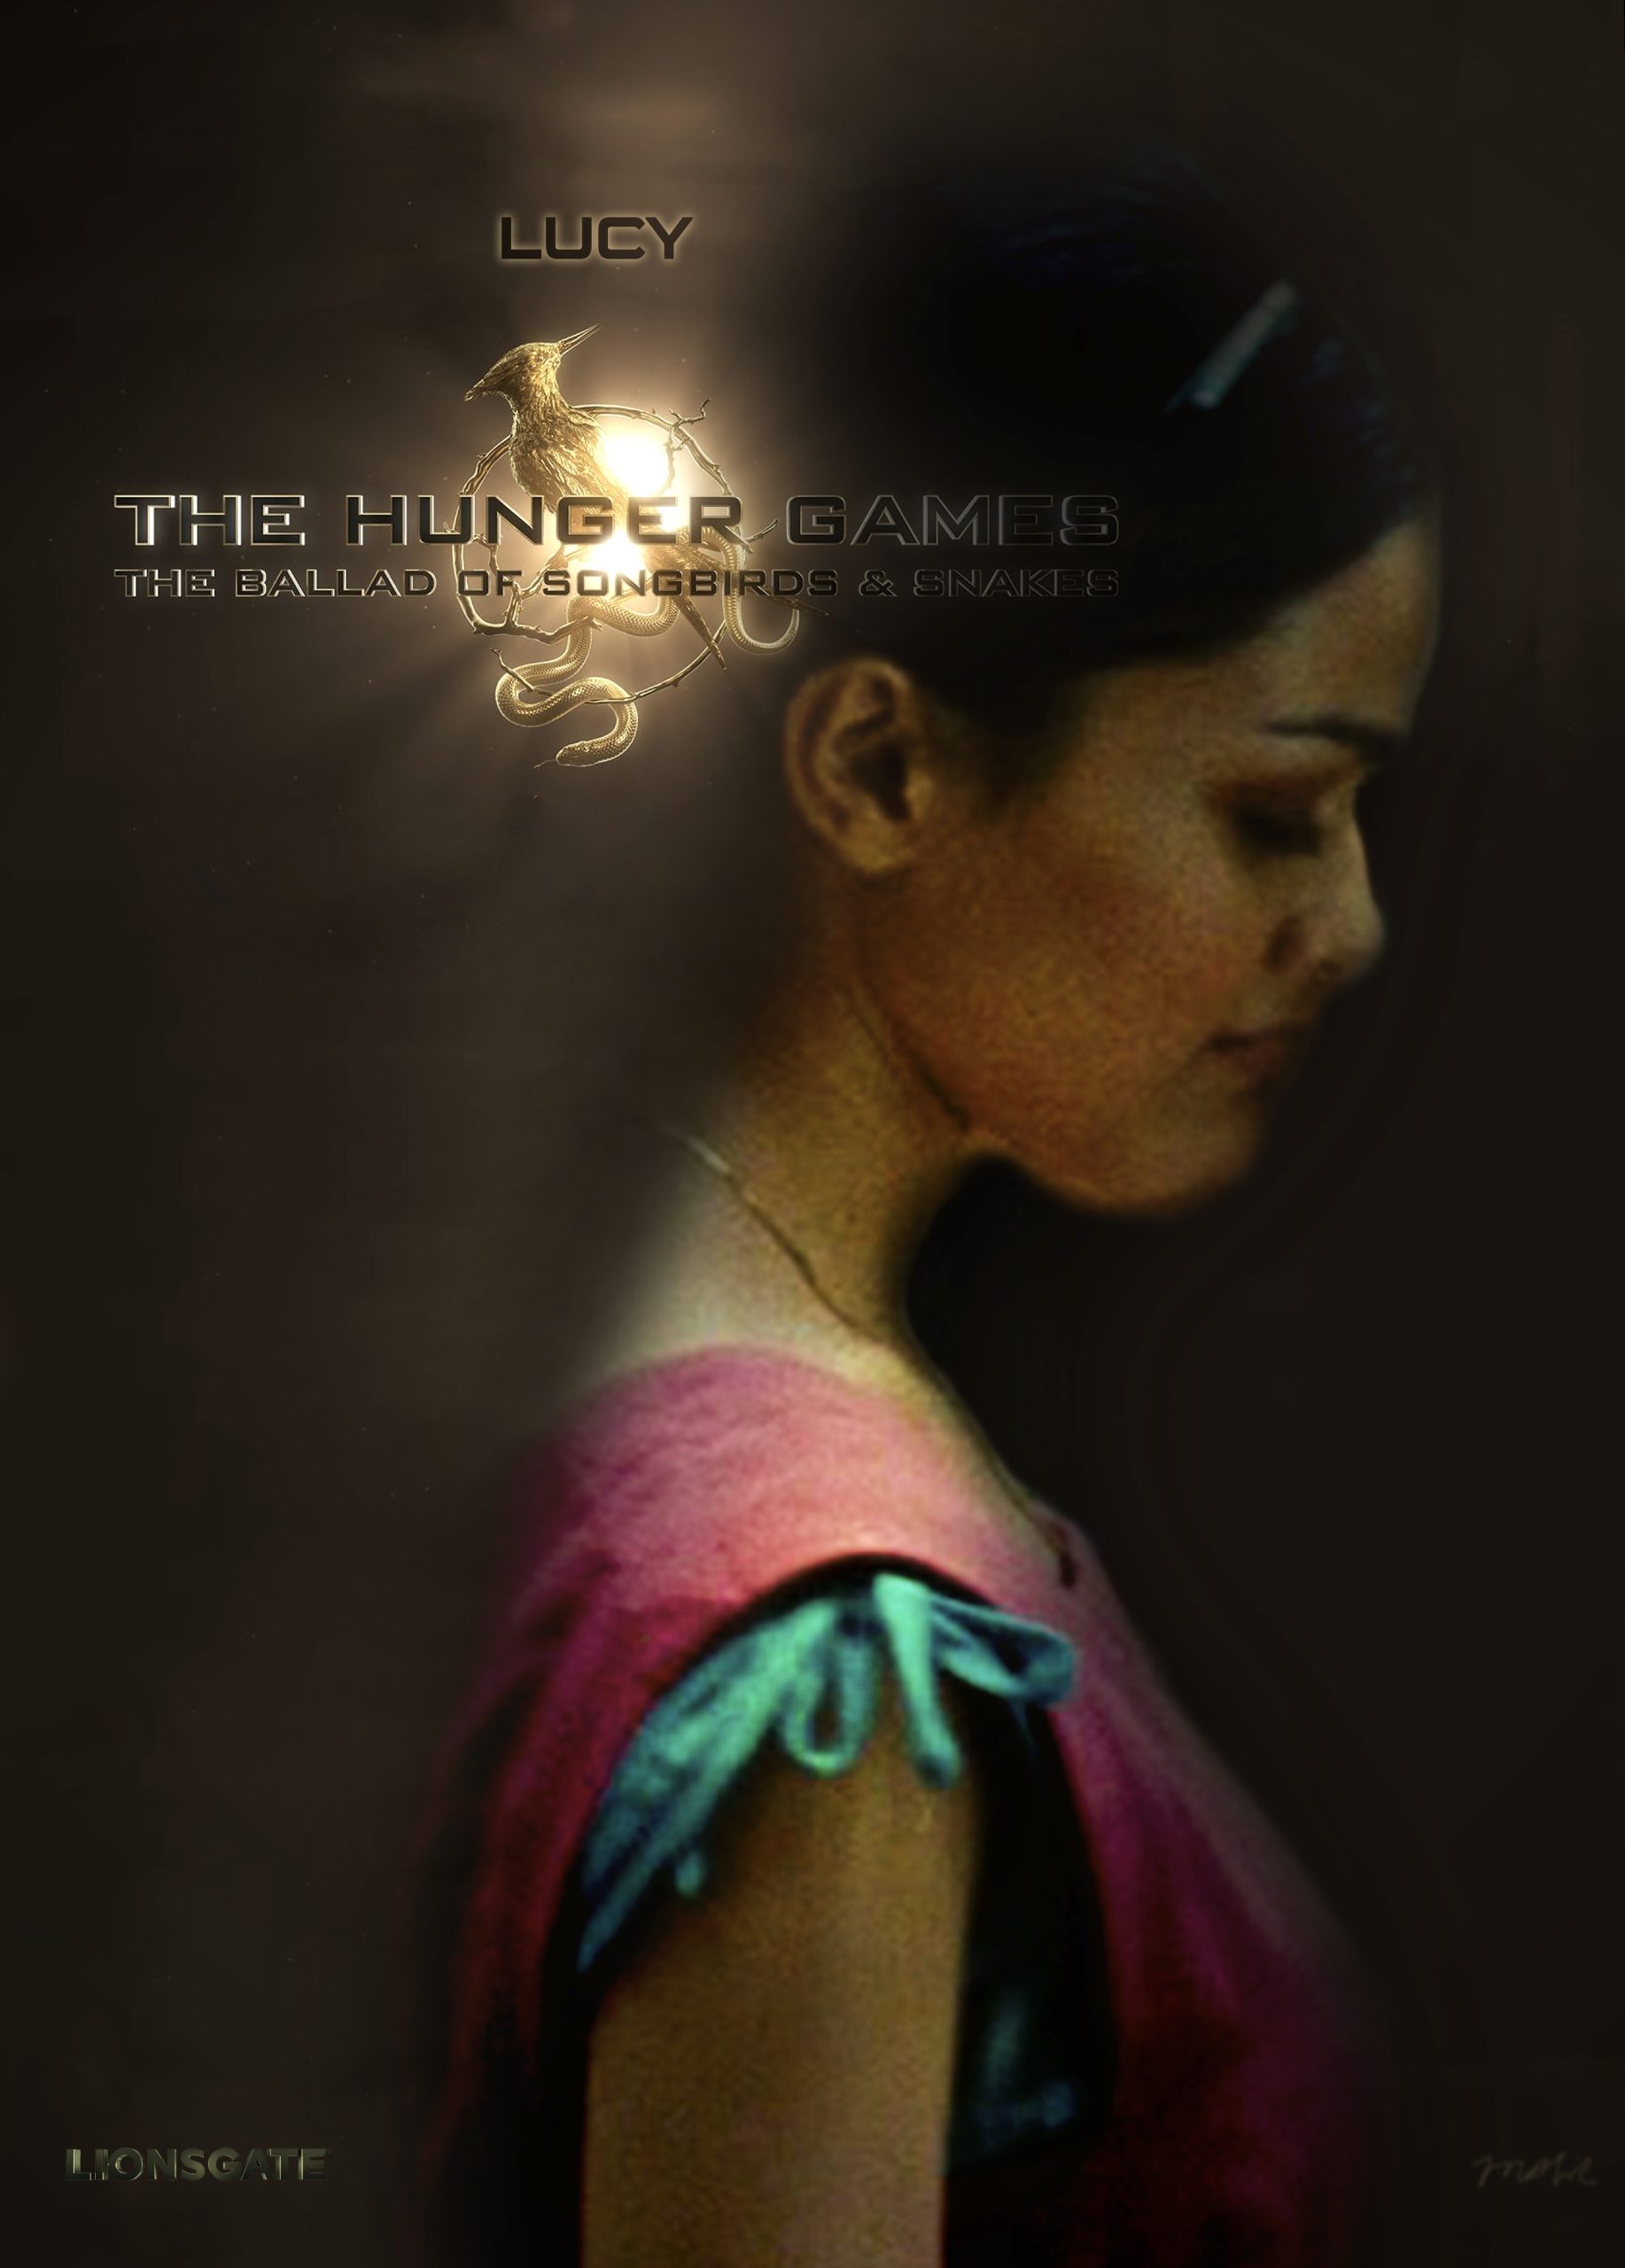 The Hunger Games: The Ballad of Songbirds and Snakes Concept Poster – Lucy